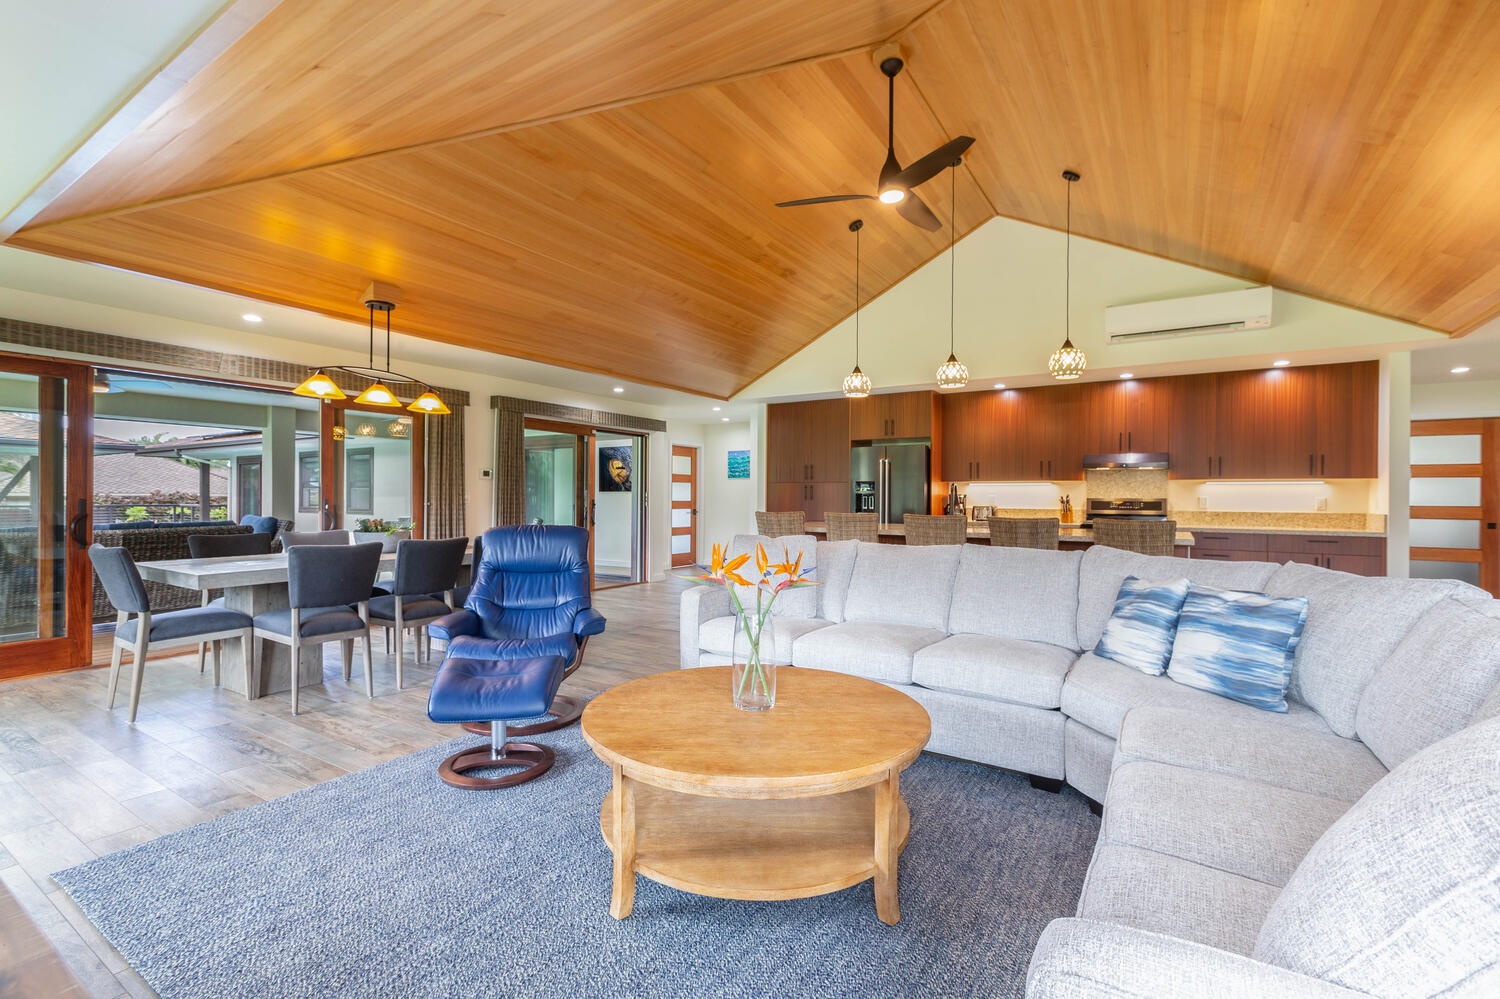 Princeville Vacation Rentals, Aloha Villa - From its large, plush couch that transforms into a pull-out within the main living area, al fresco indoor and outdoor dining spaces